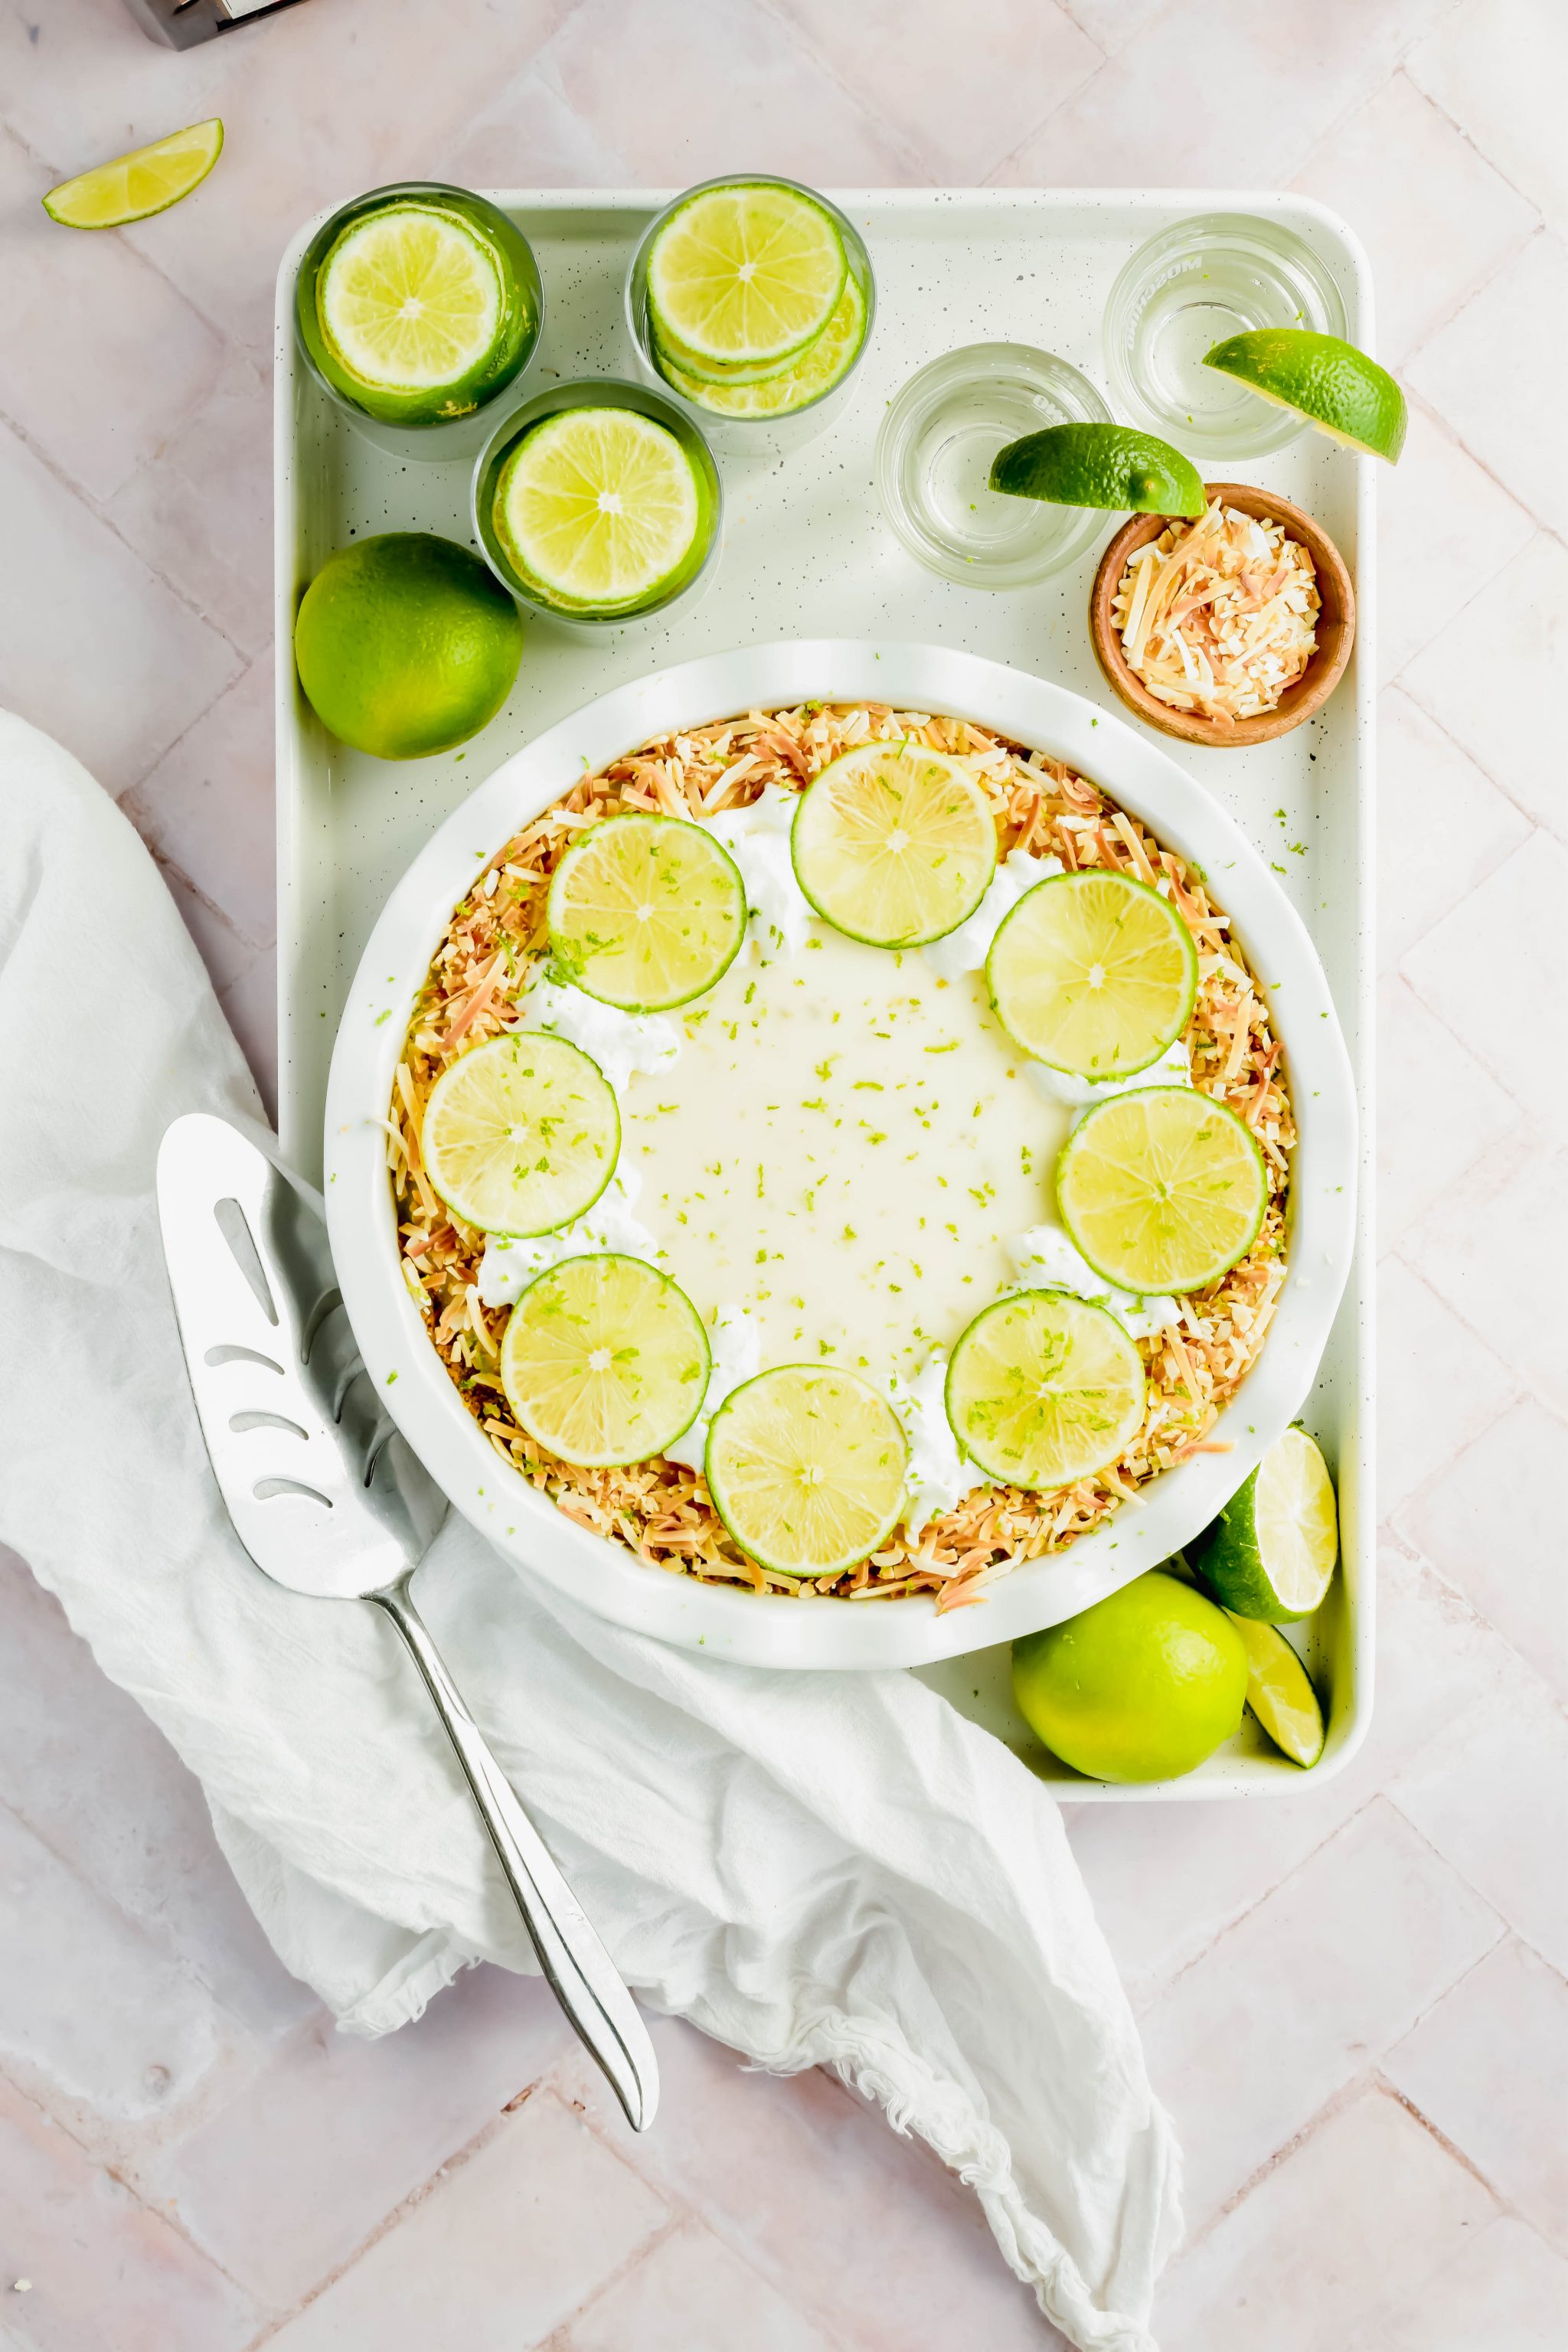 key lime pie garnished with toasted coconut and lime slices on white baking sheet surrounded by limes and tequila shots on white background.